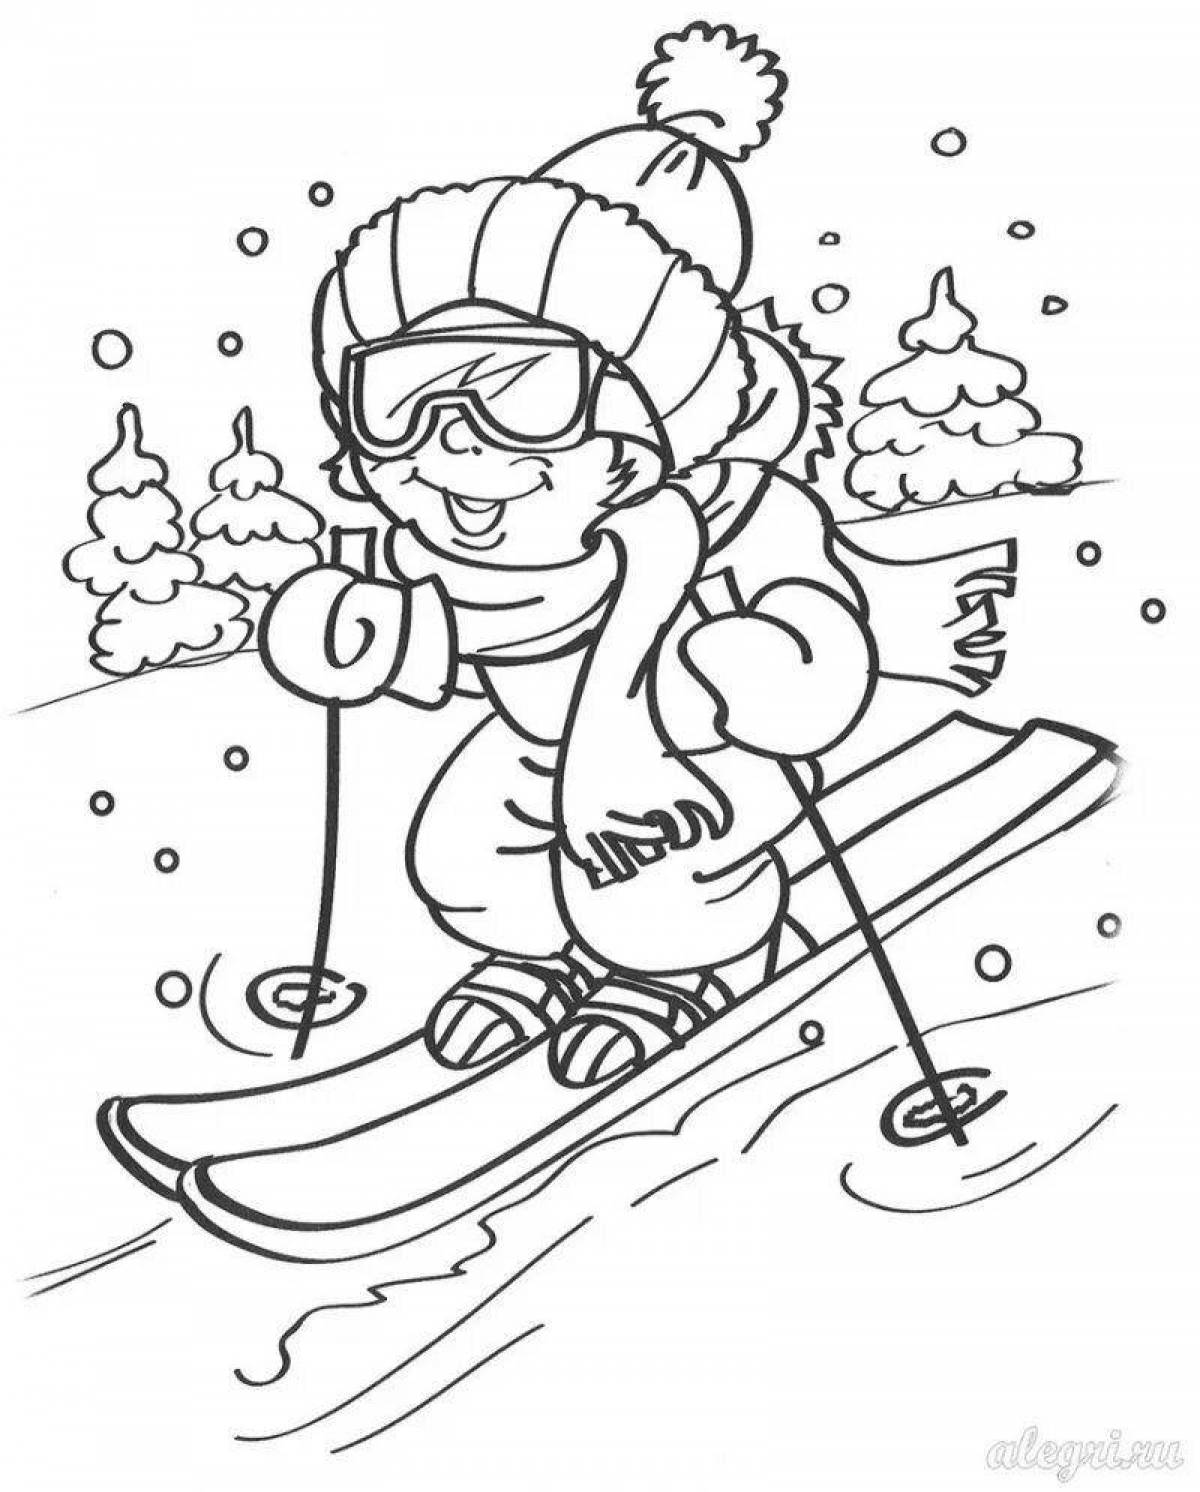 Live coloring winter sports for children